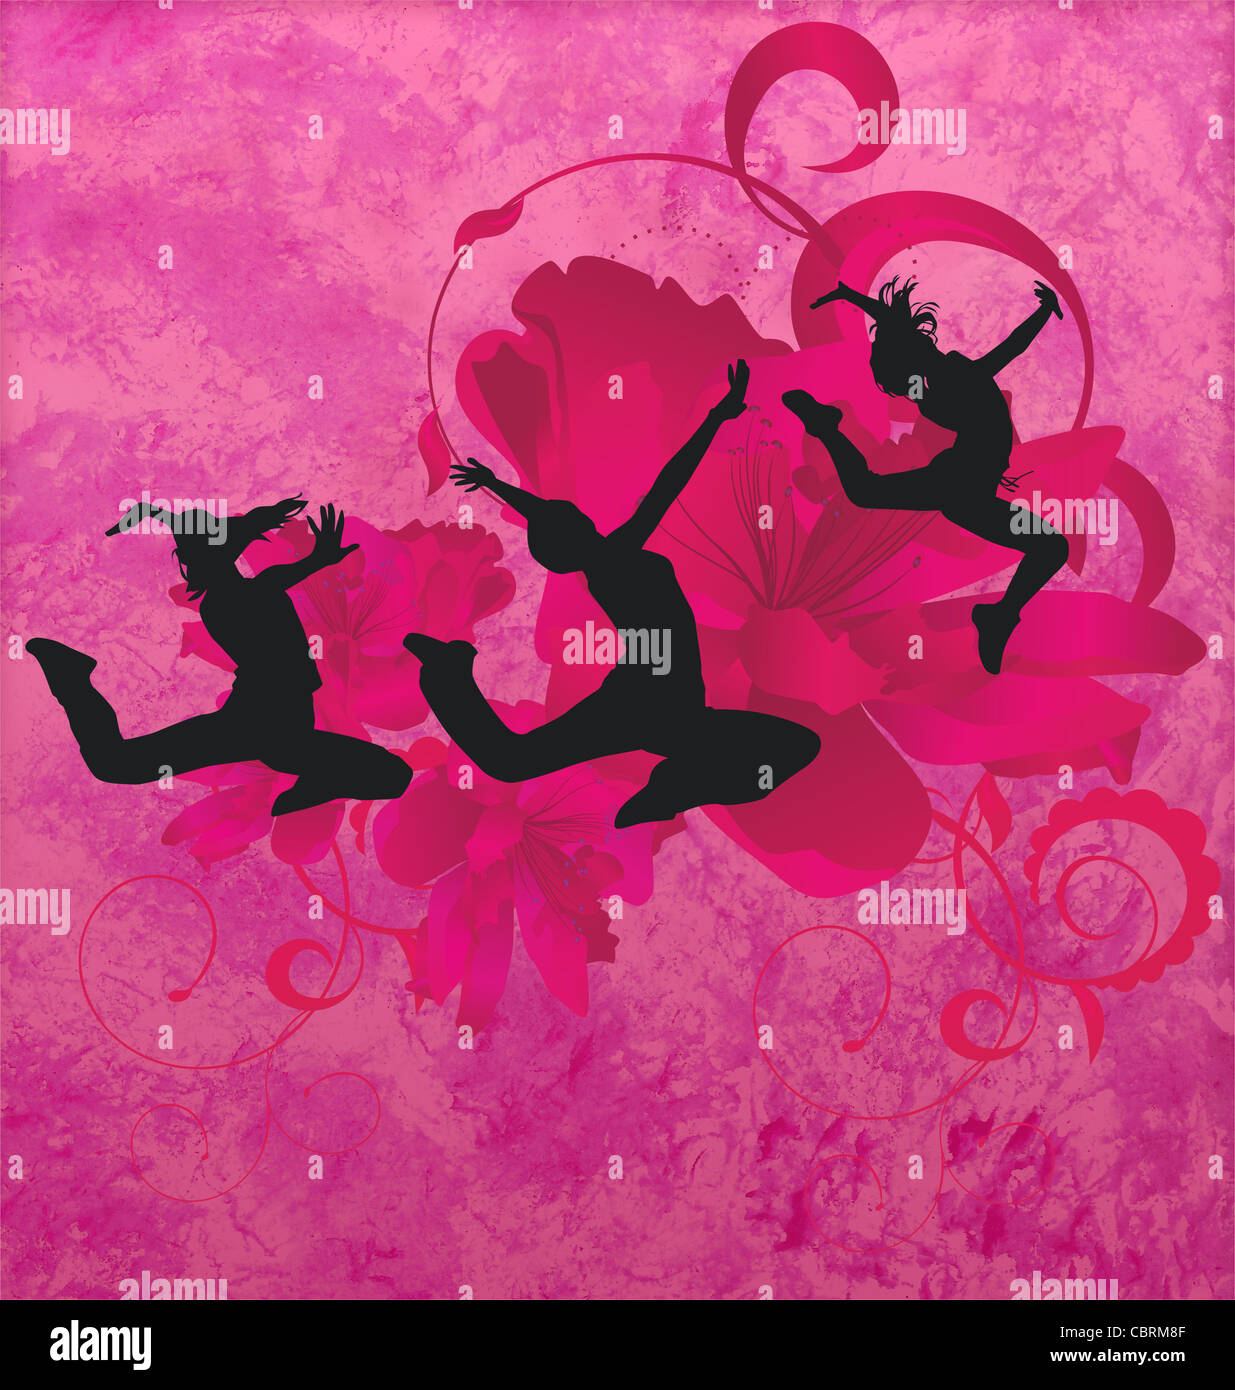 three urban modern dancing women silhuettes on the red or pink grunge background Stock Photo